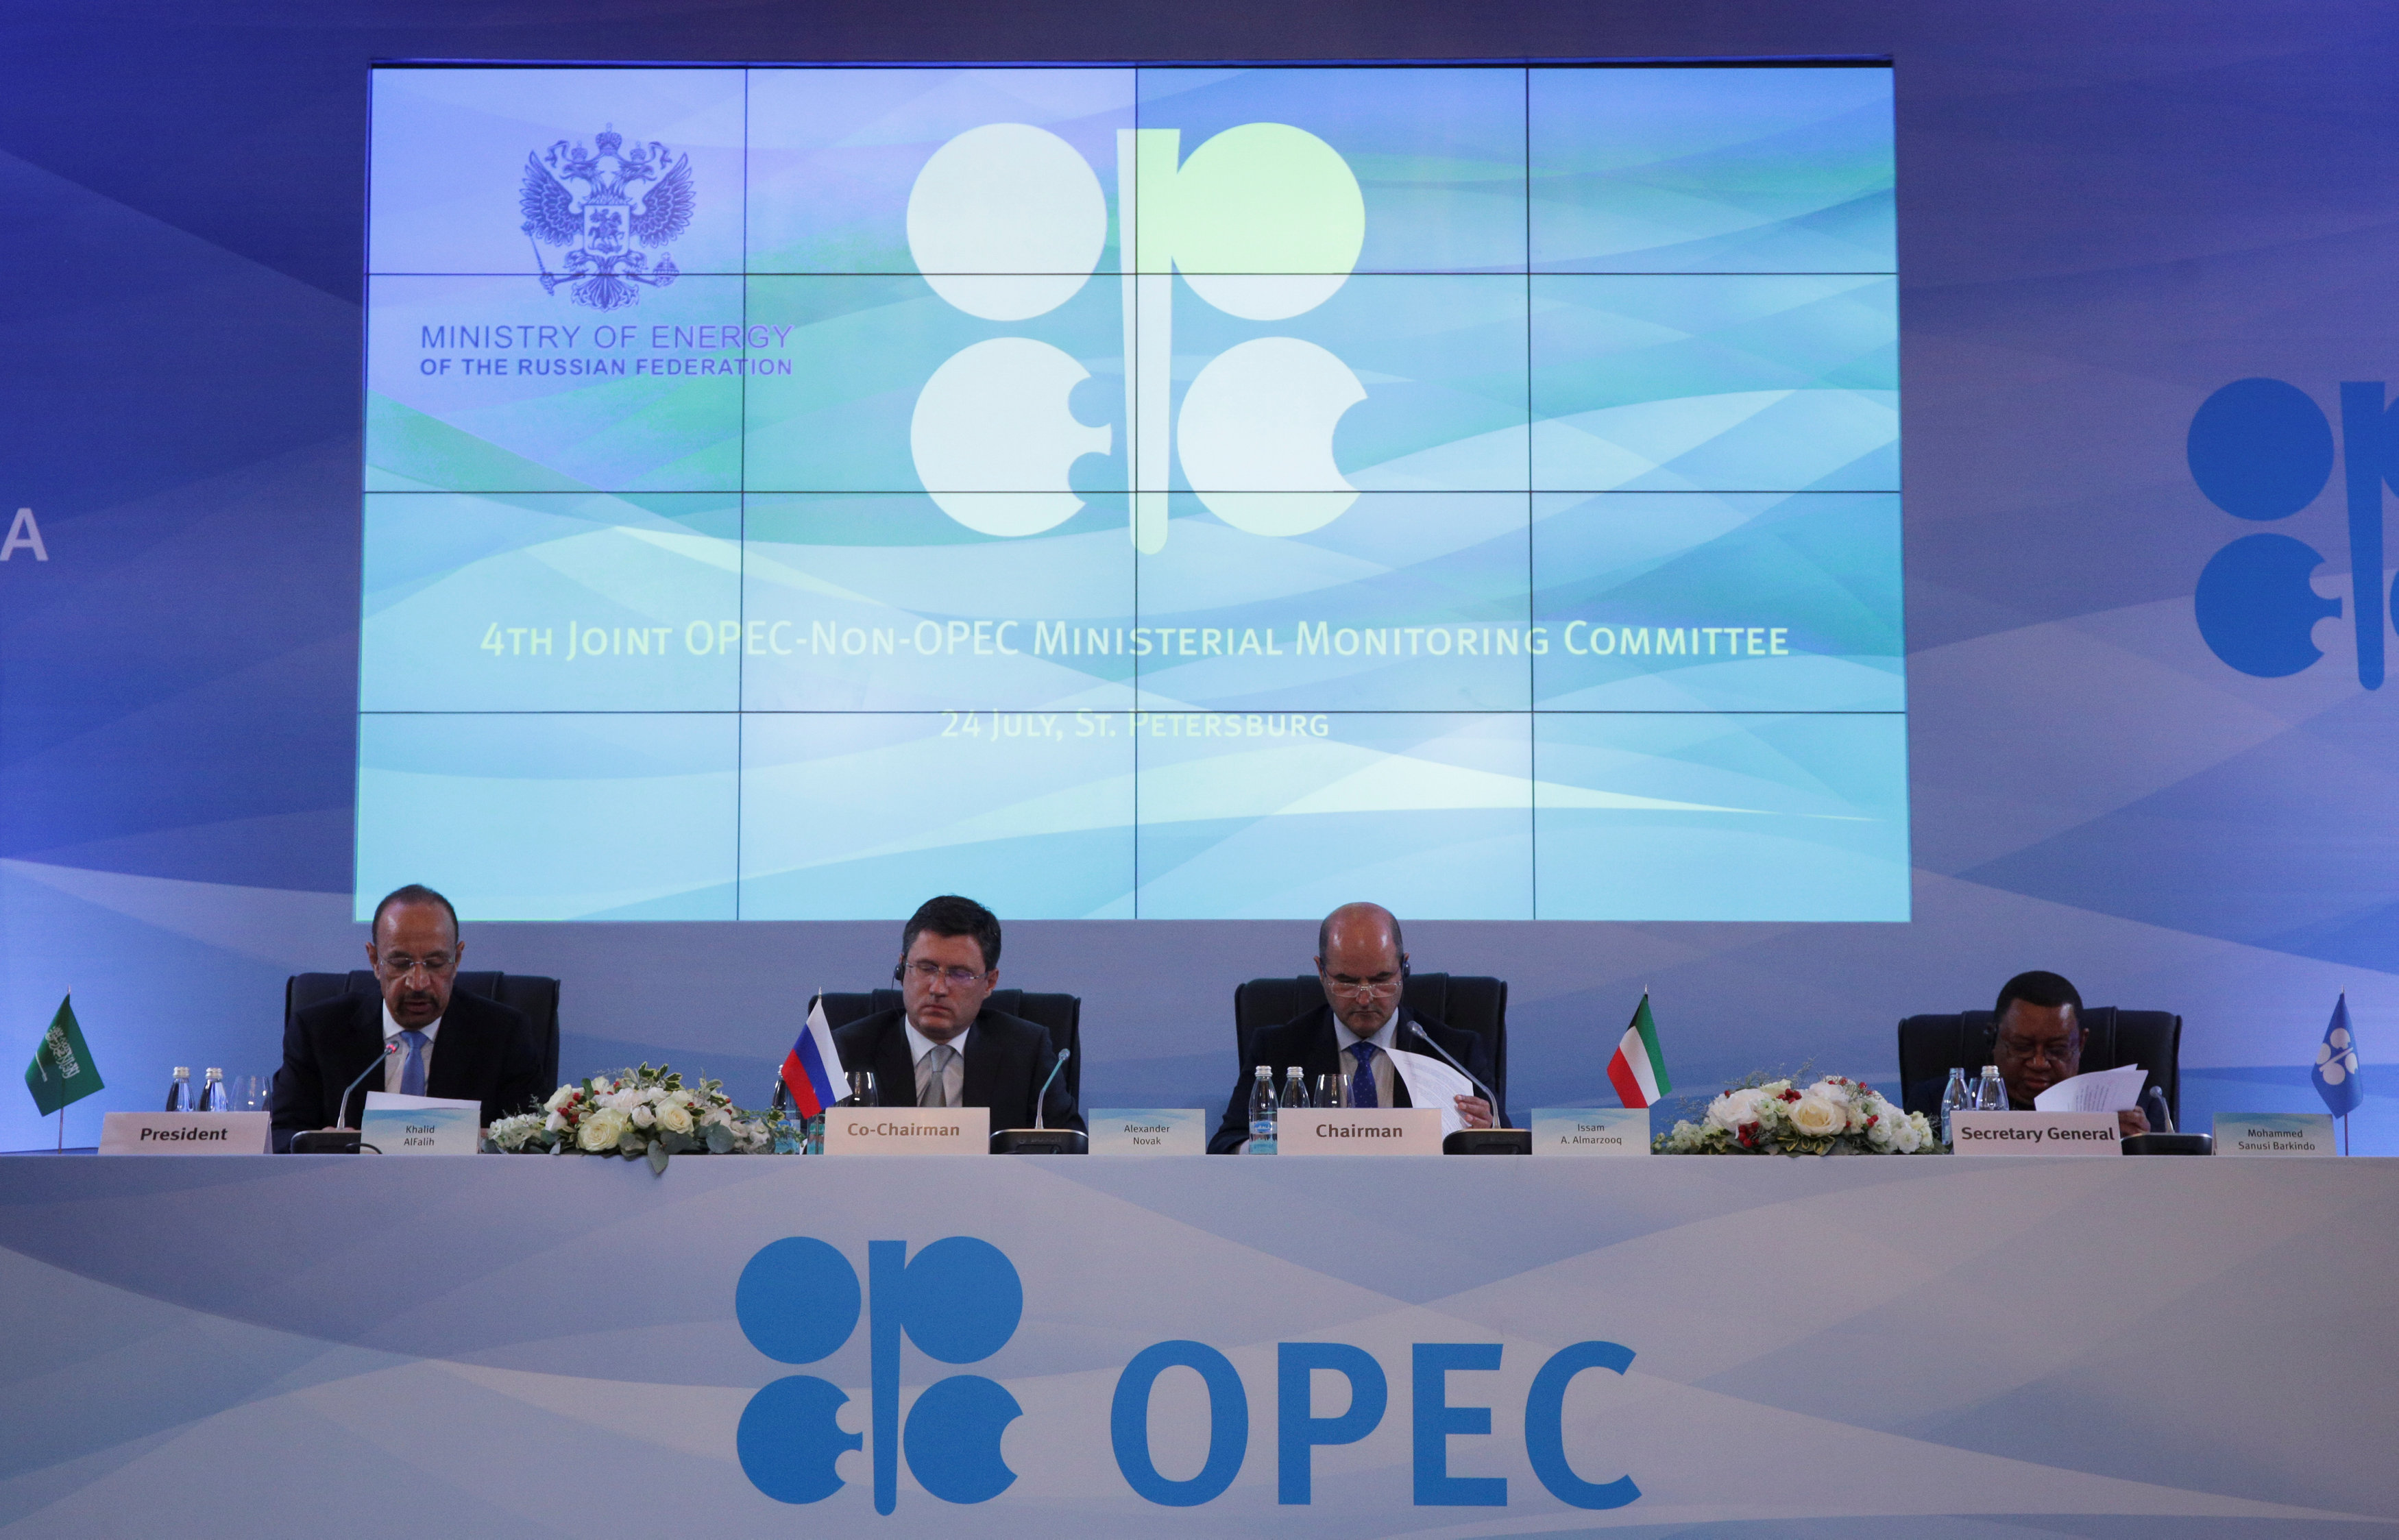 2017-07-24T101759Z_810765187_RC1EE6DC4060_RTRMADP_3_RUSSIA-OPEC-MEETING